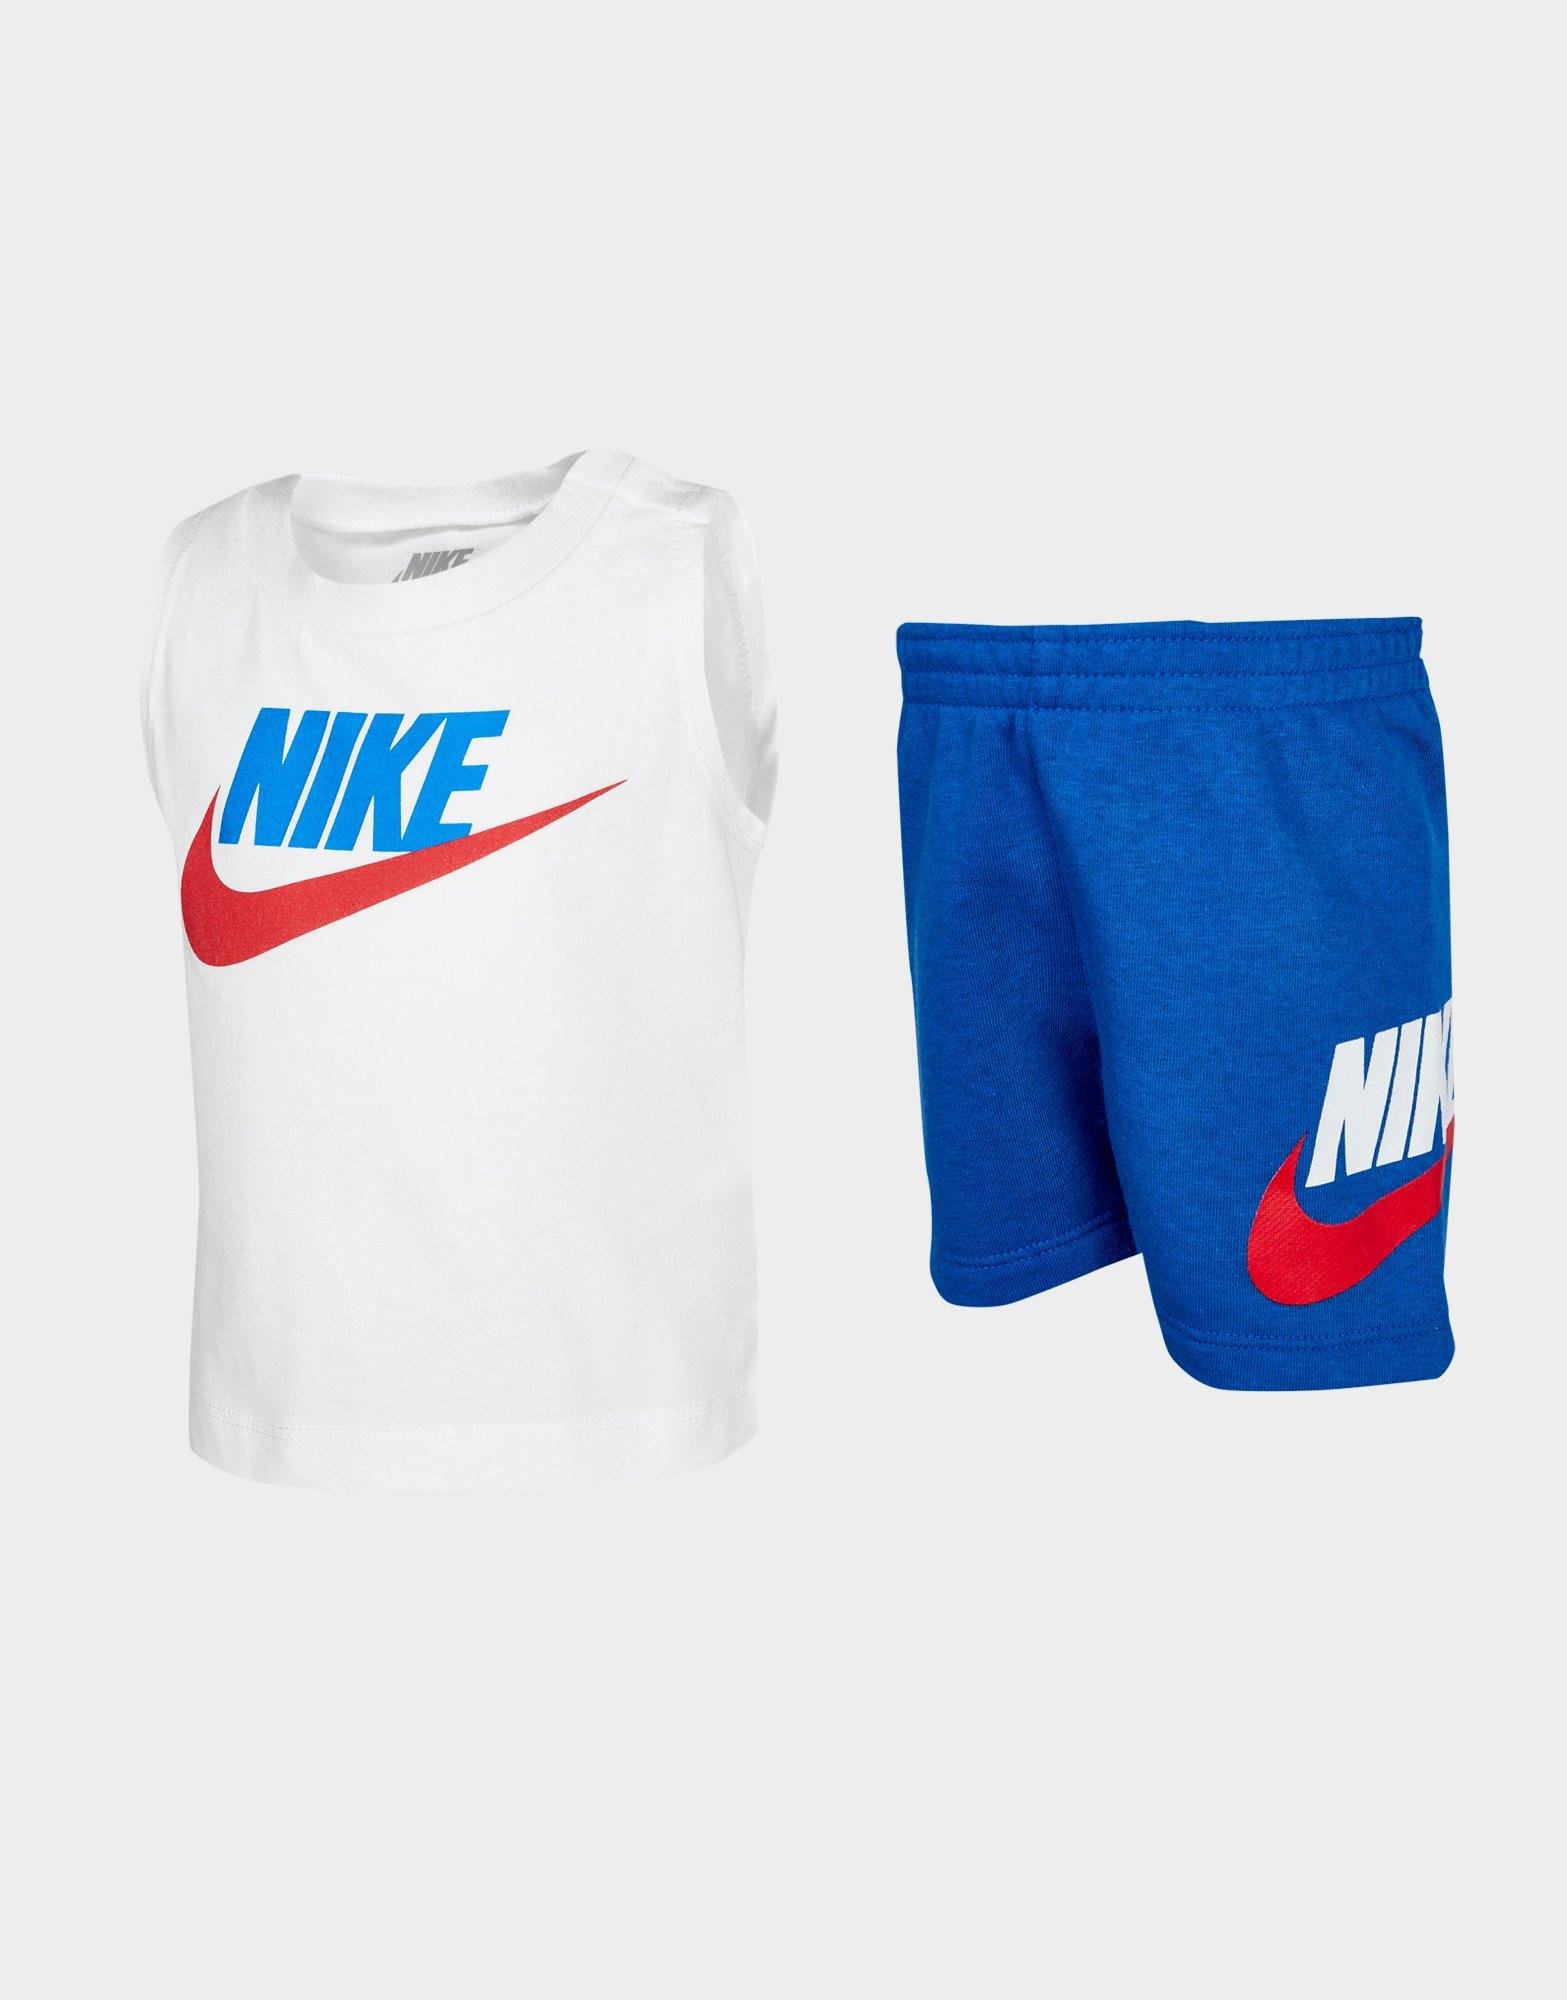 nike boxing vest and shorts